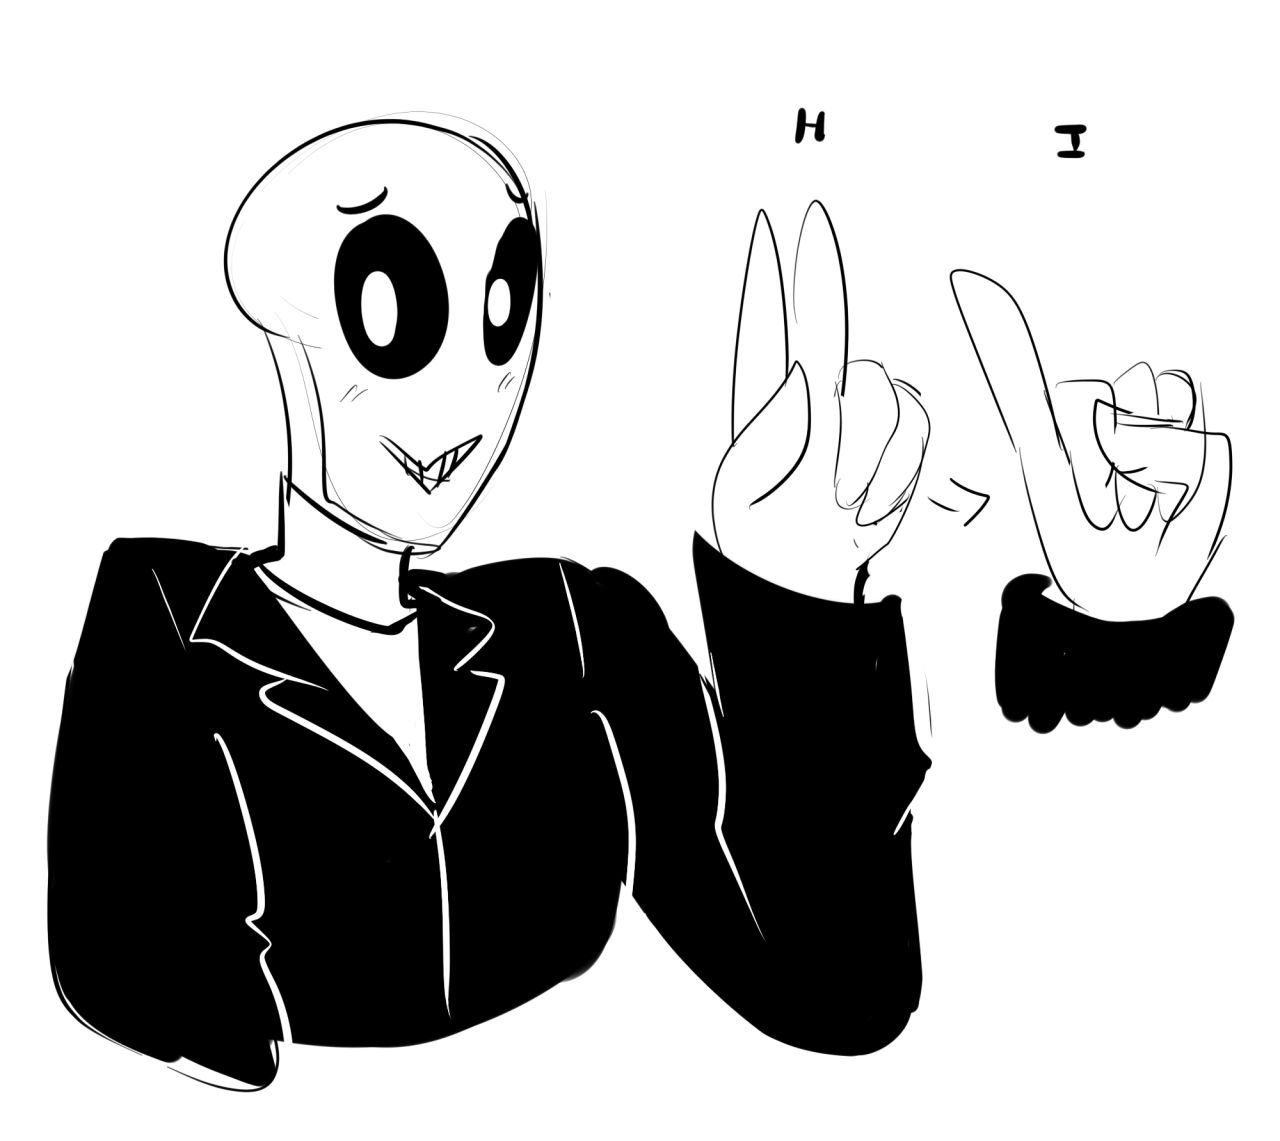 Actually The W D In W D Gaster Is For Wingdings As 140330310